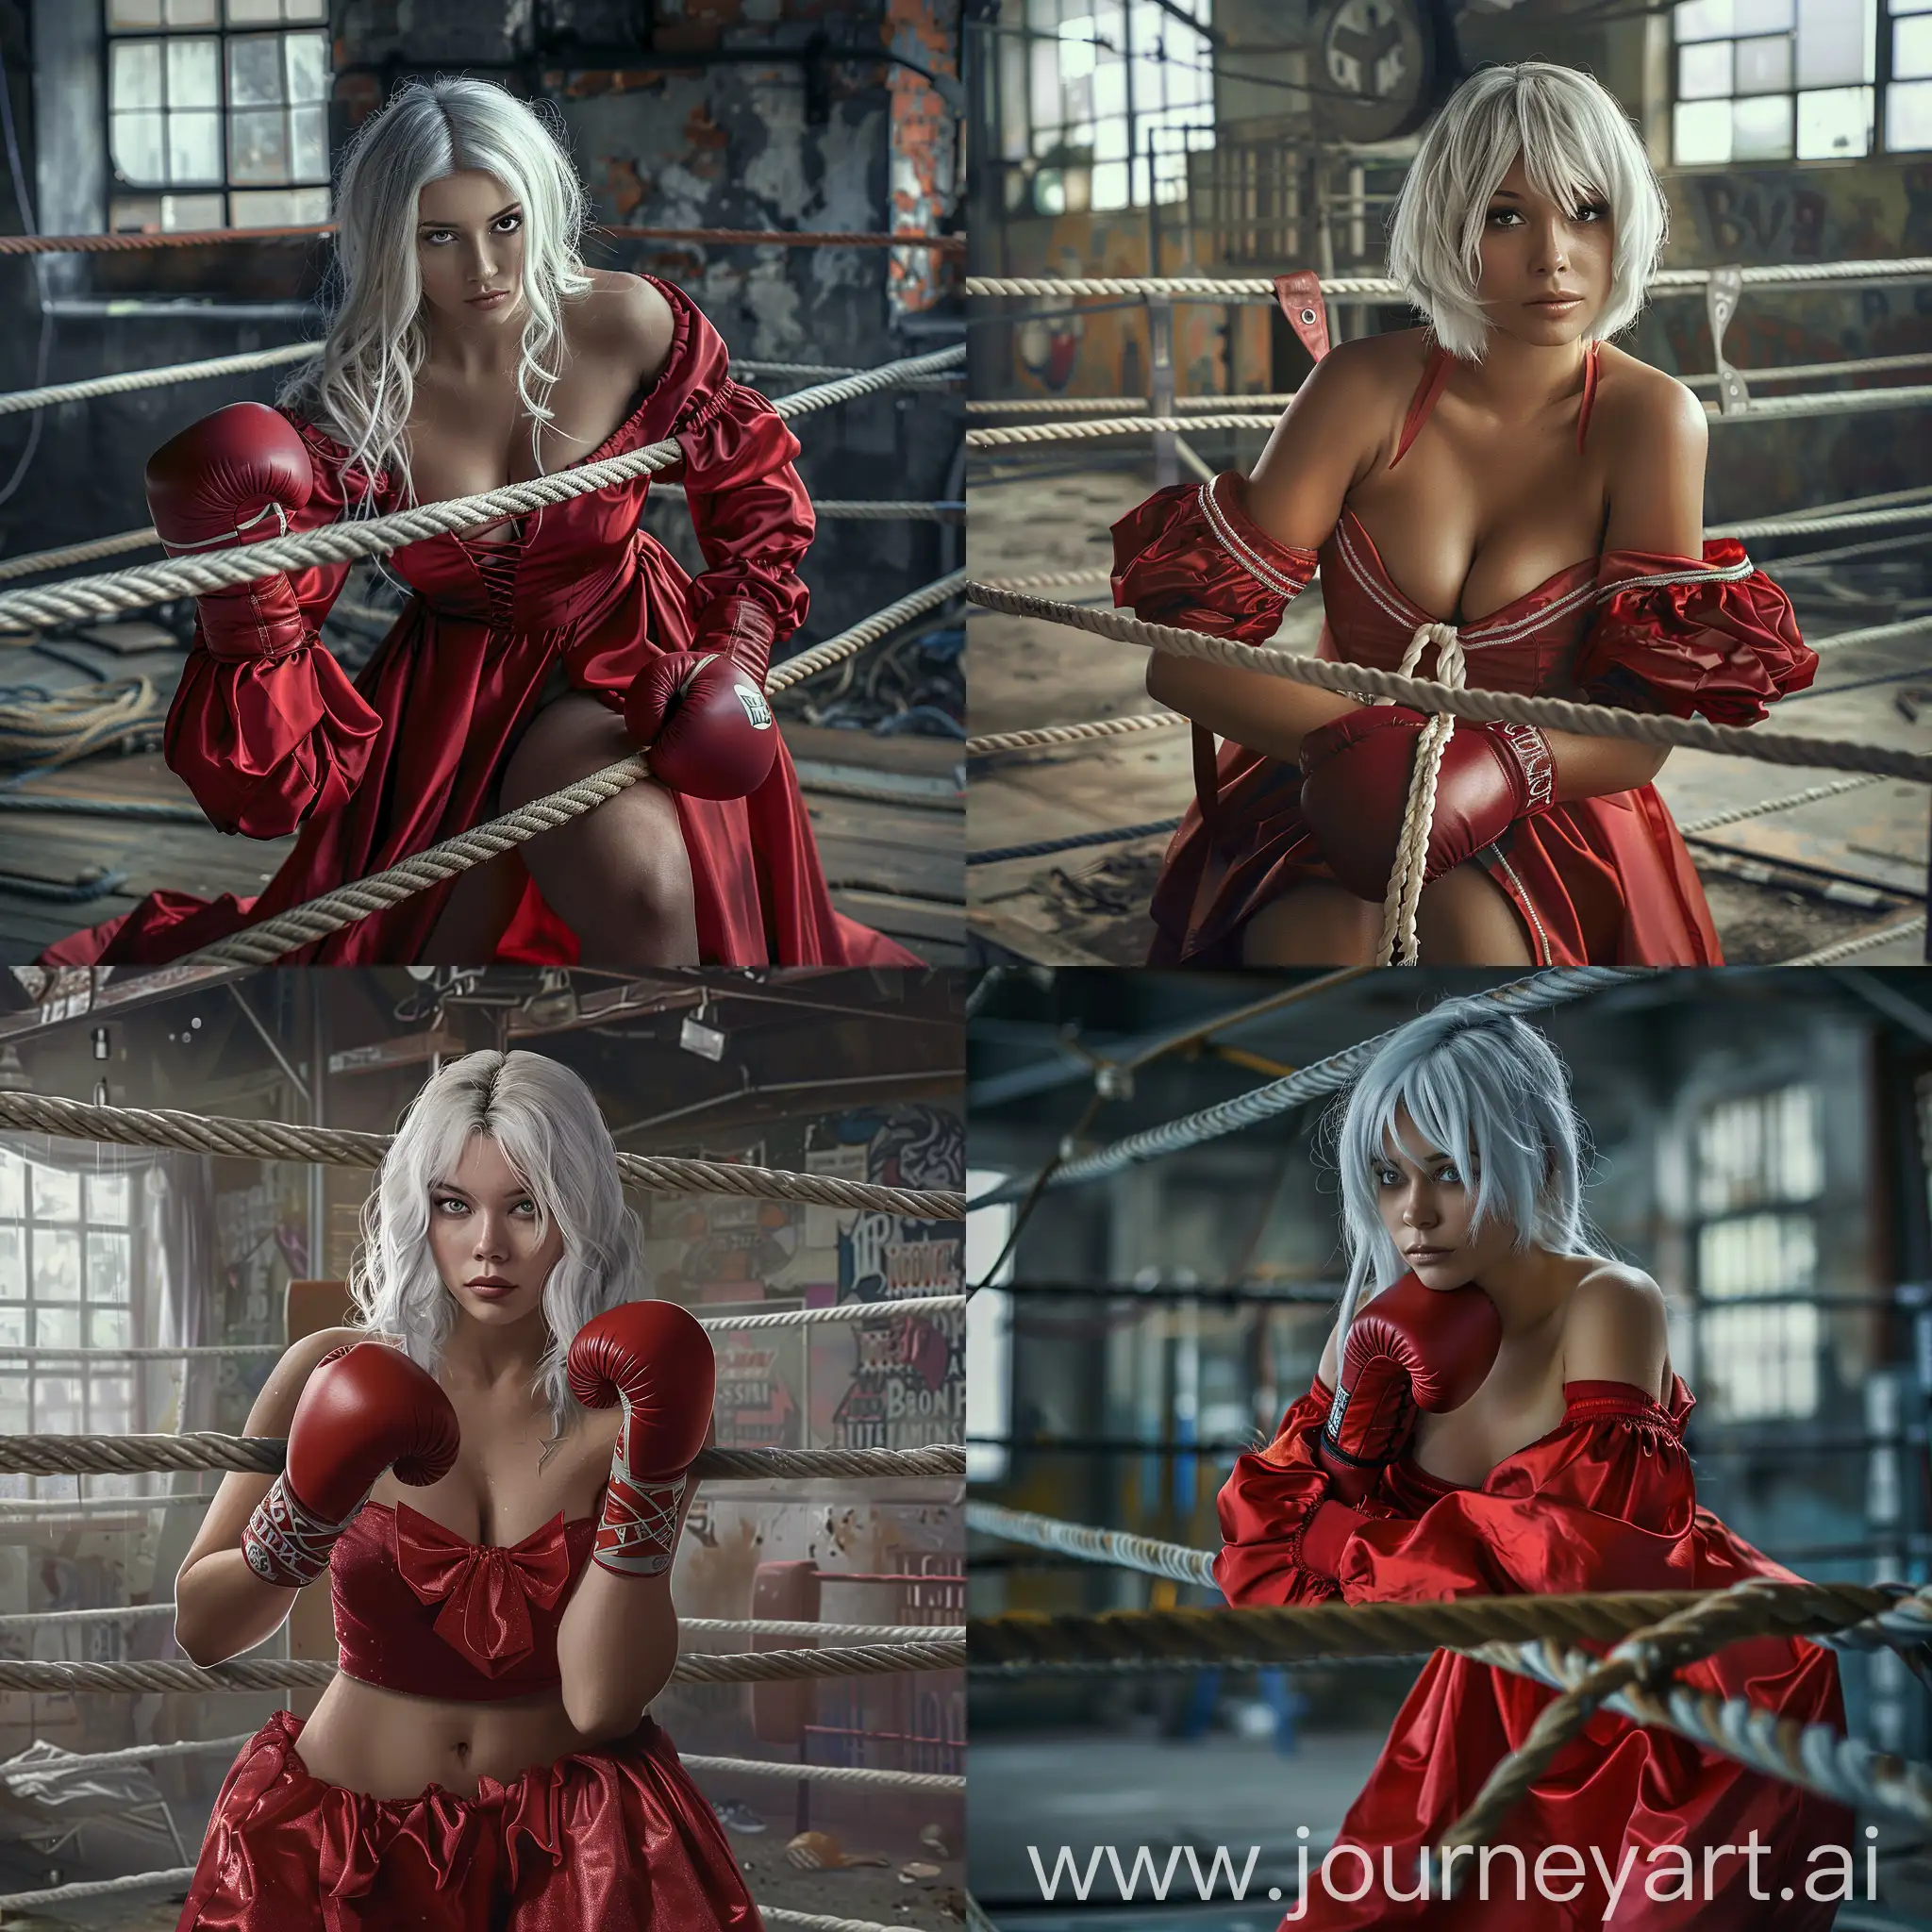 Dynamic-WhiteHaired-Female-Boxer-in-Red-Cheerleader-Gown-at-Gritty-Boxing-Gym